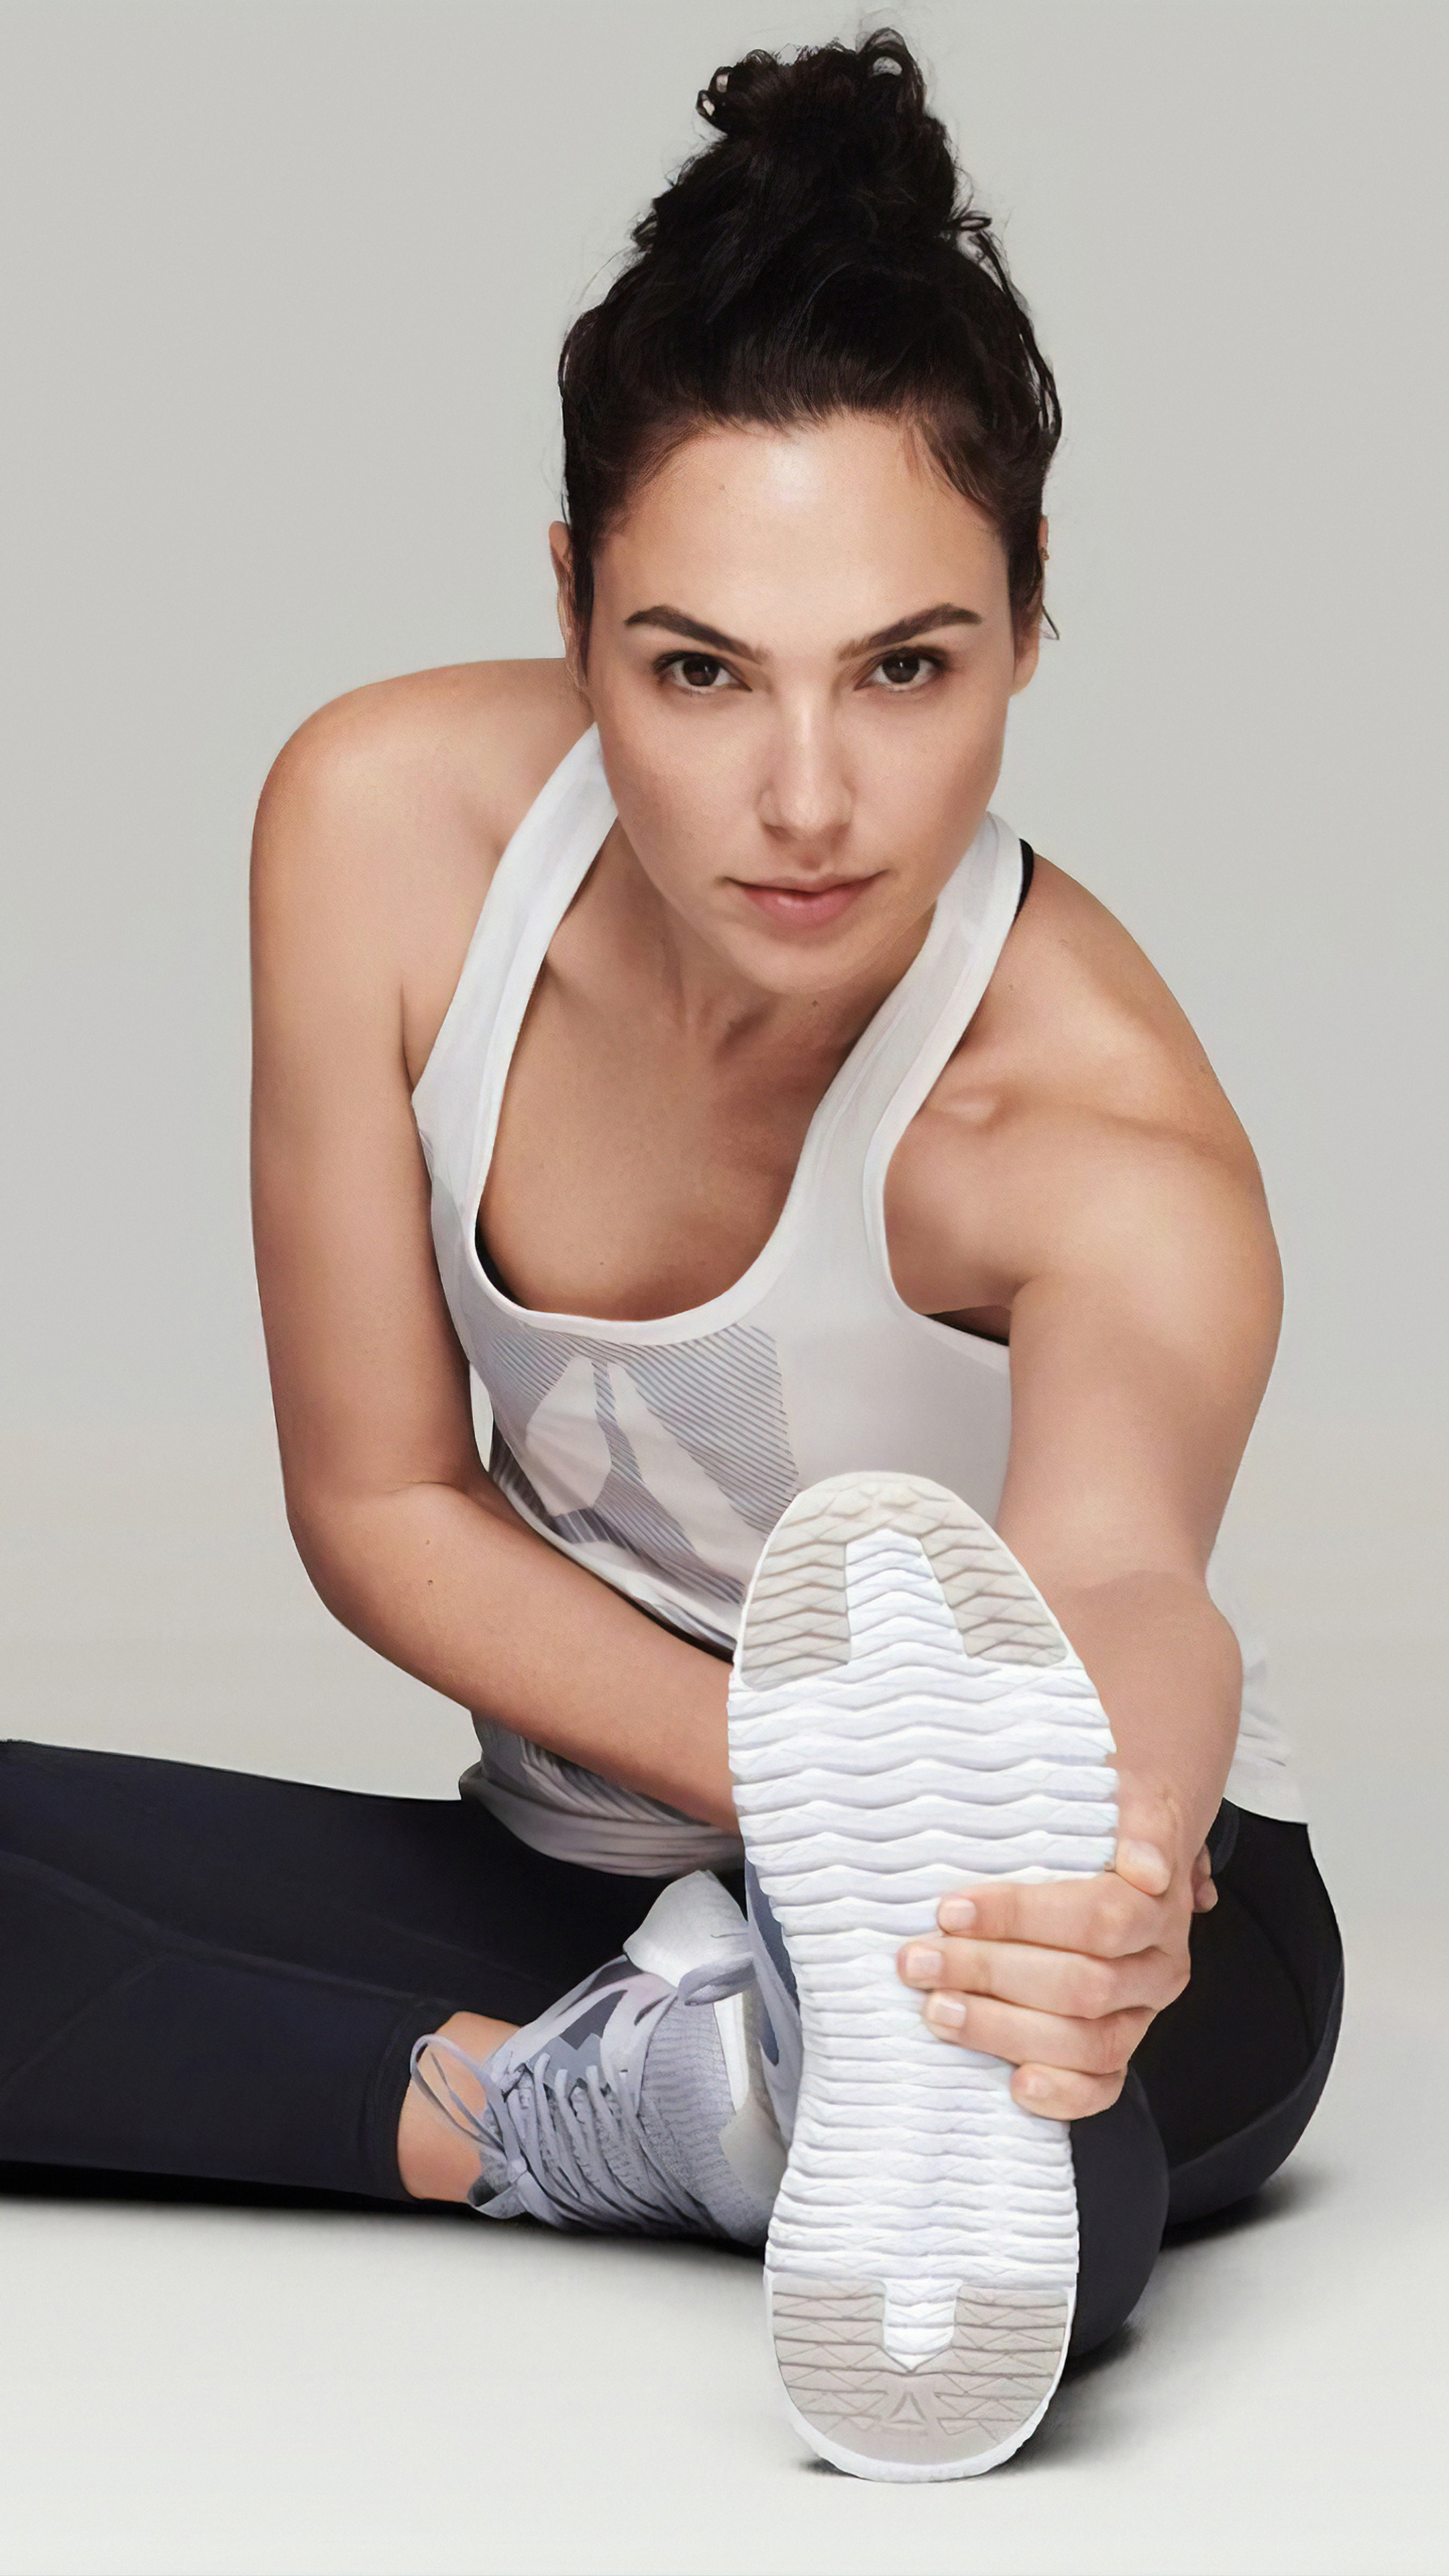 Reebok: Gal Gadot teamed up with the sneaker and activewear brand, Collaboration. 2160x3840 4K Background.